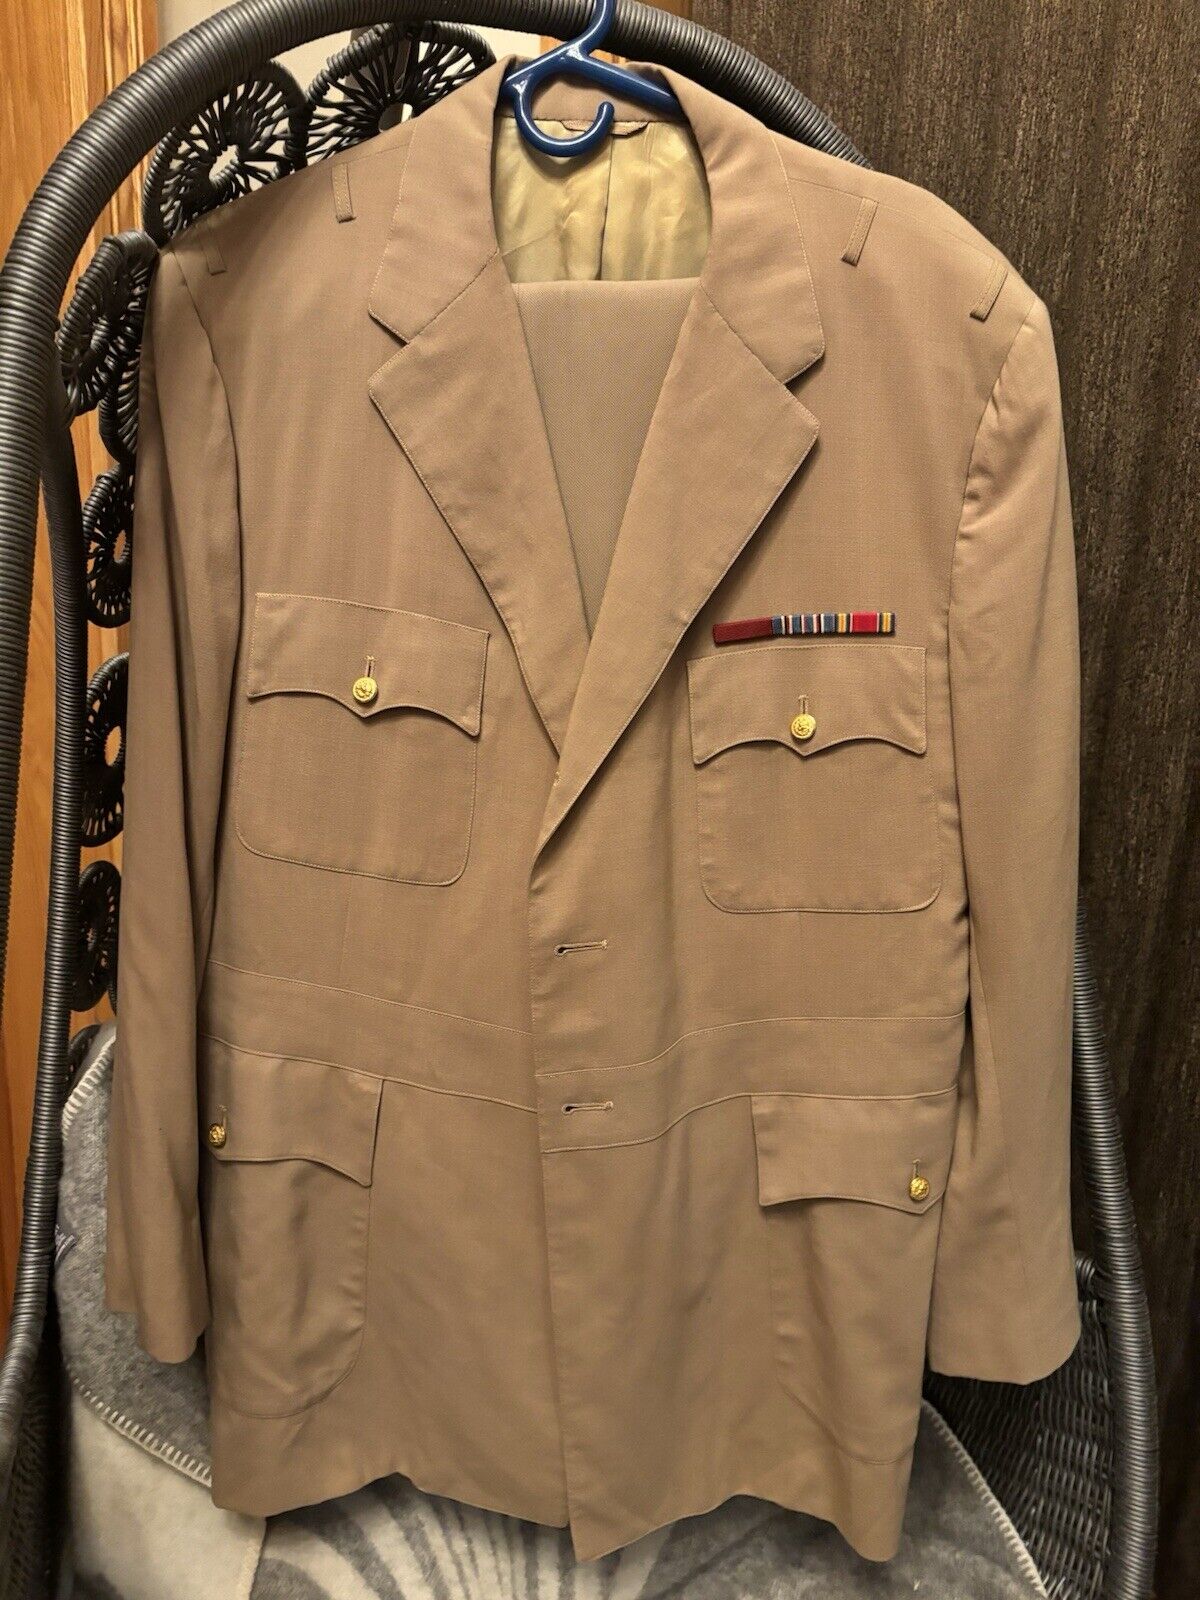 1960s US Navy Tailored Lt. Commander Uniform And Pants Named, Missing Buttons.